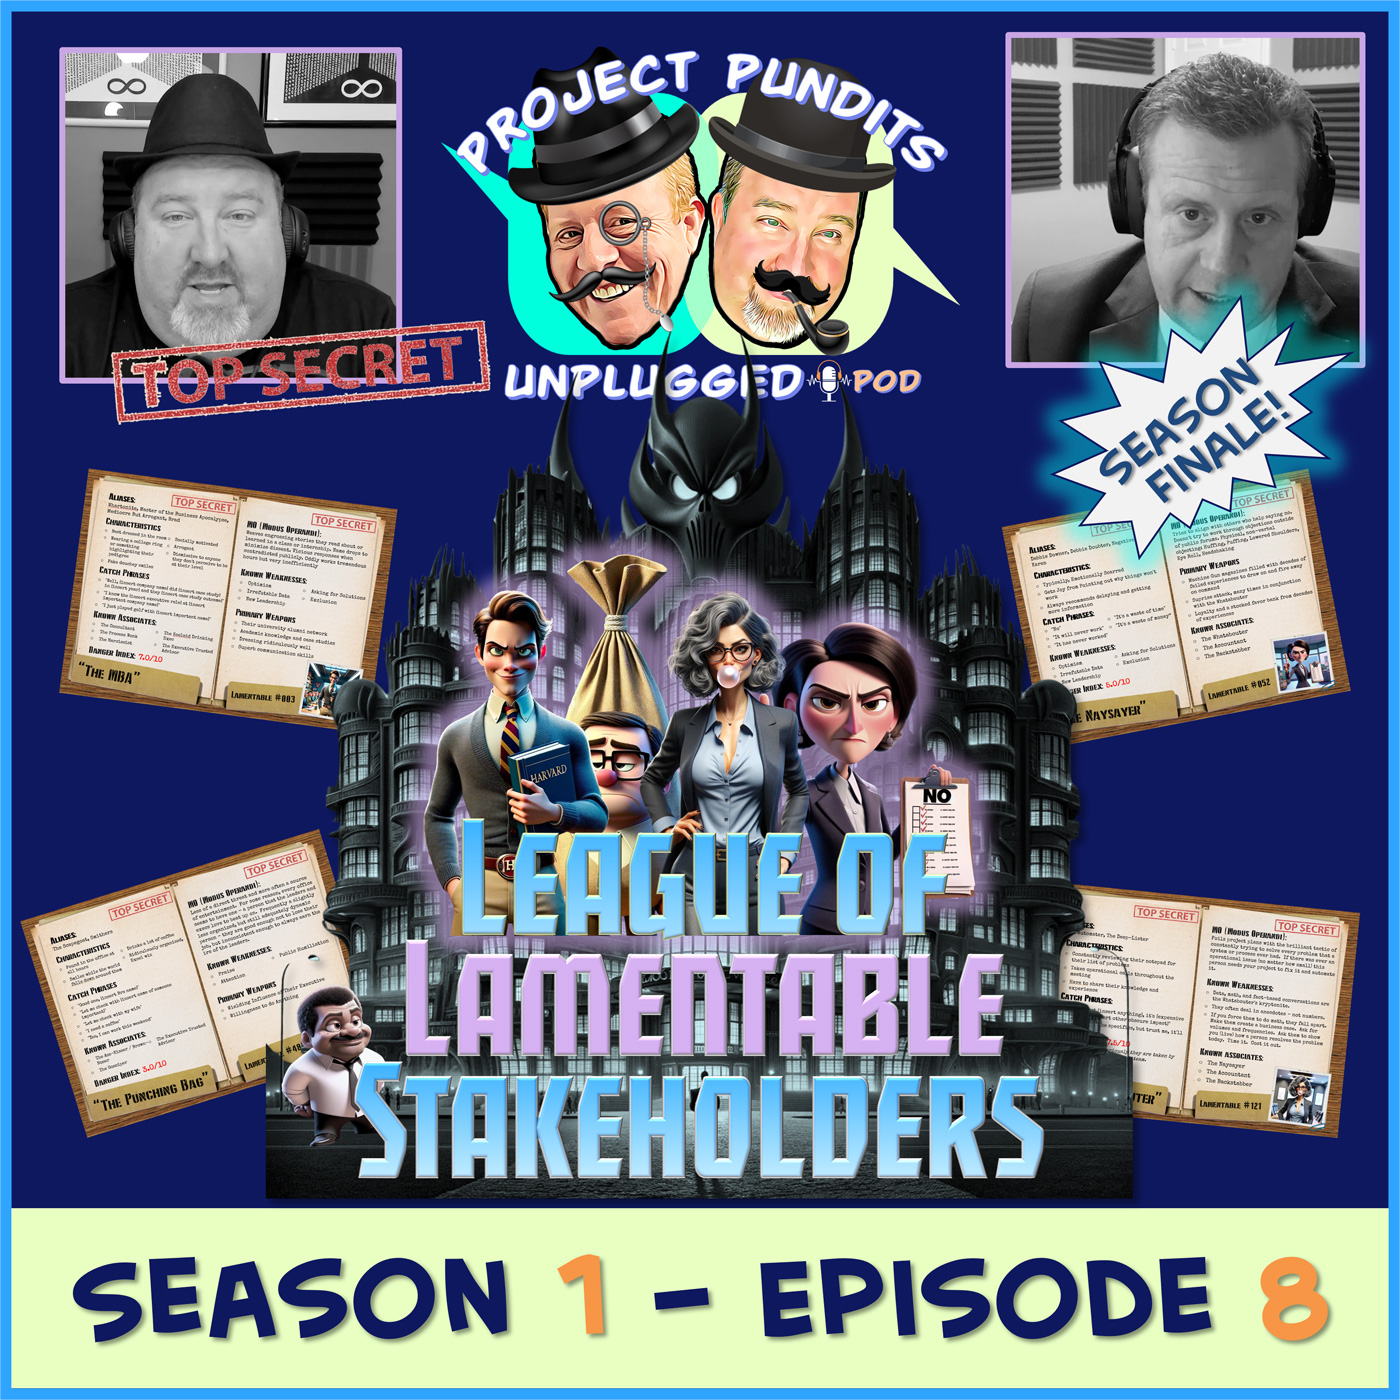 The League of Lamentable Stakeholders - Project Pundits Unplugged Pod - Season 1 Episode 8